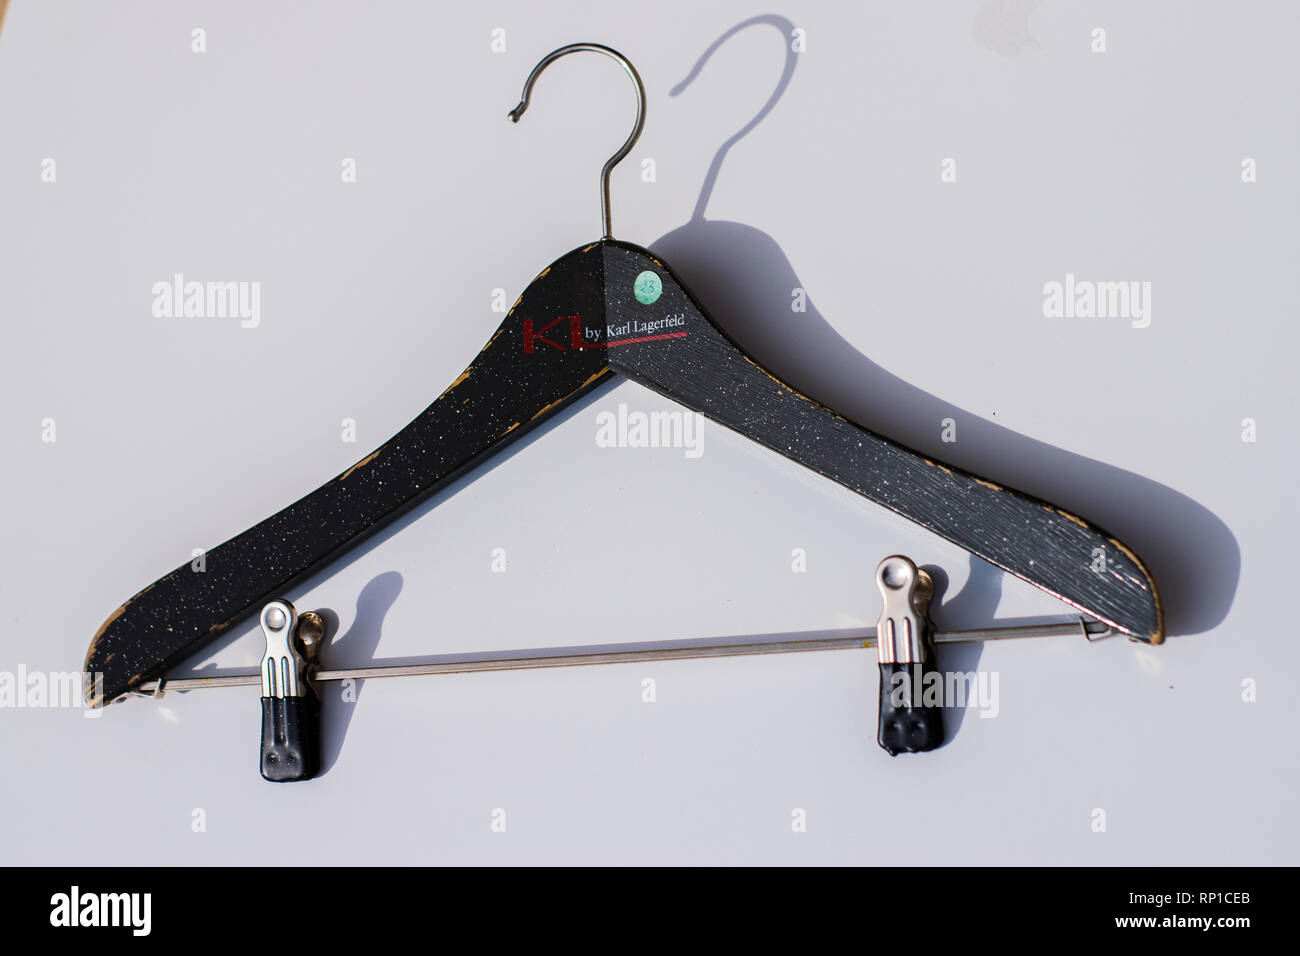 KARL LAGERFELD hanger from 23 rue Palestro atelier from the 80's Stock Photo